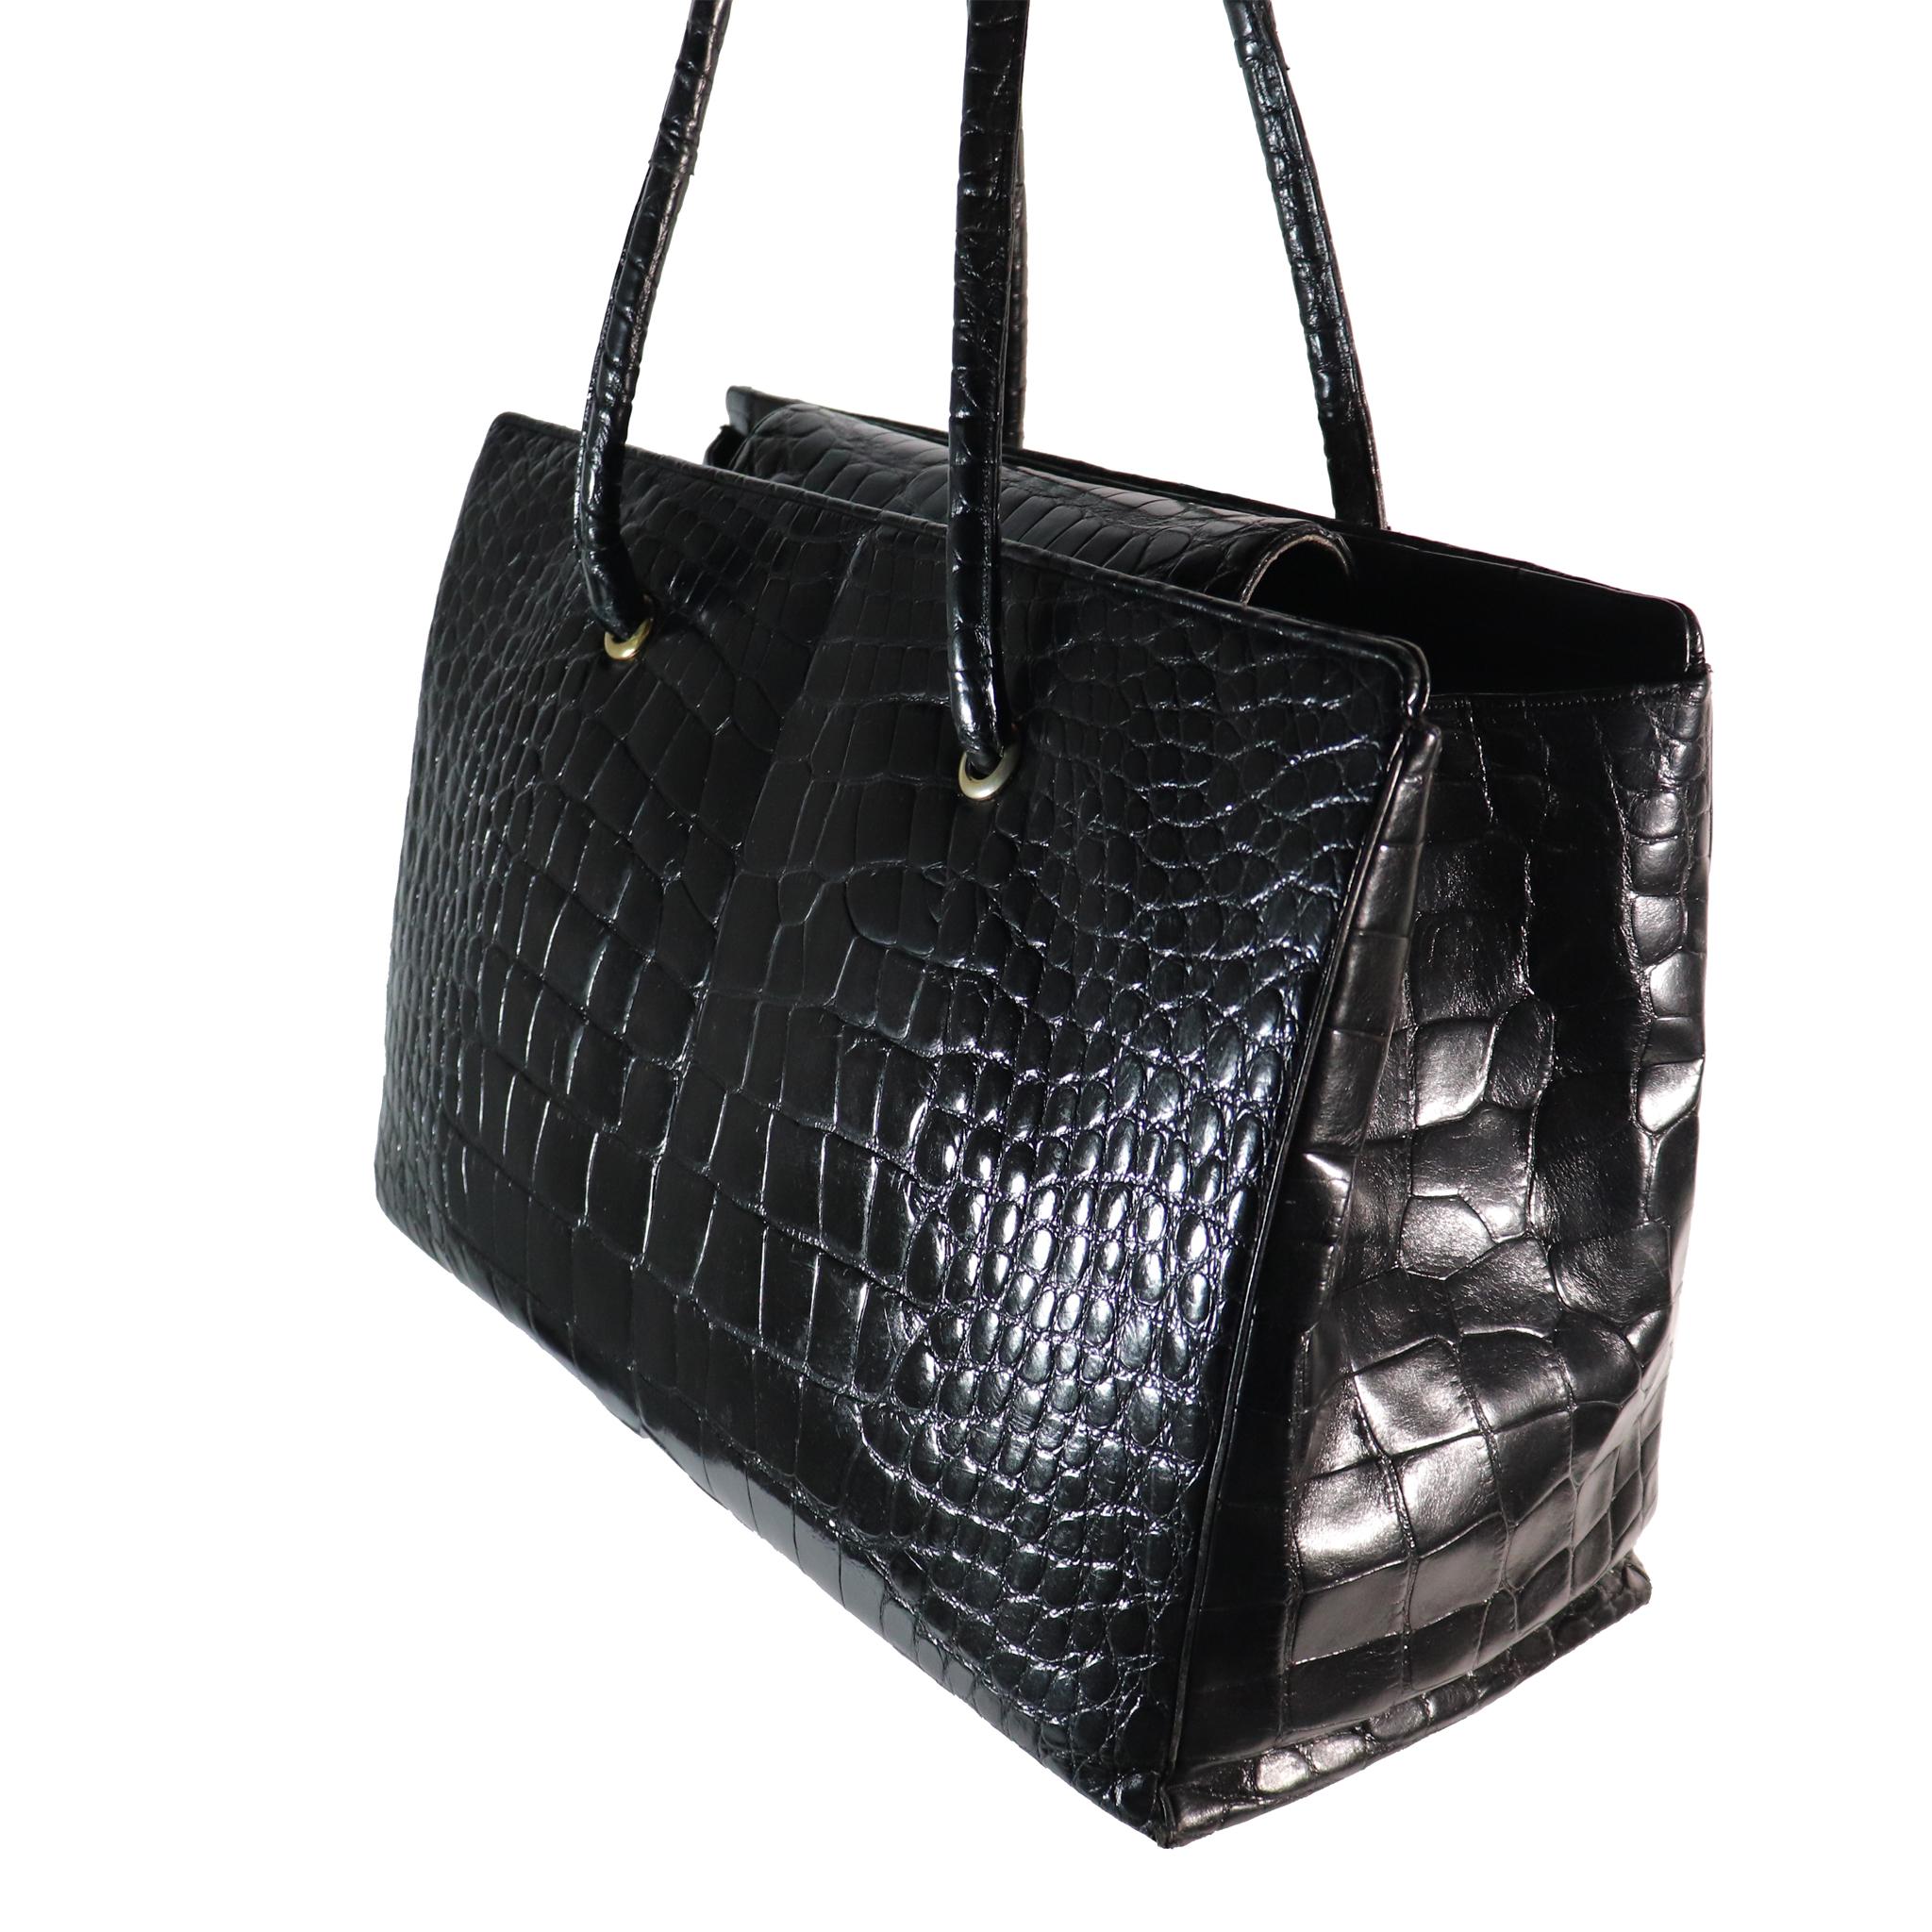 Judith Leiber Large Black Crocodile Purse with Snap Top. In Excellent condition, This hand bag or tote can be used for carrying laptop, iPad as well. 
VERY RARE 

Measurements:

Height - 10.5 Inches 
Width - 15.5 Inches 
Height with Strap - 20.5